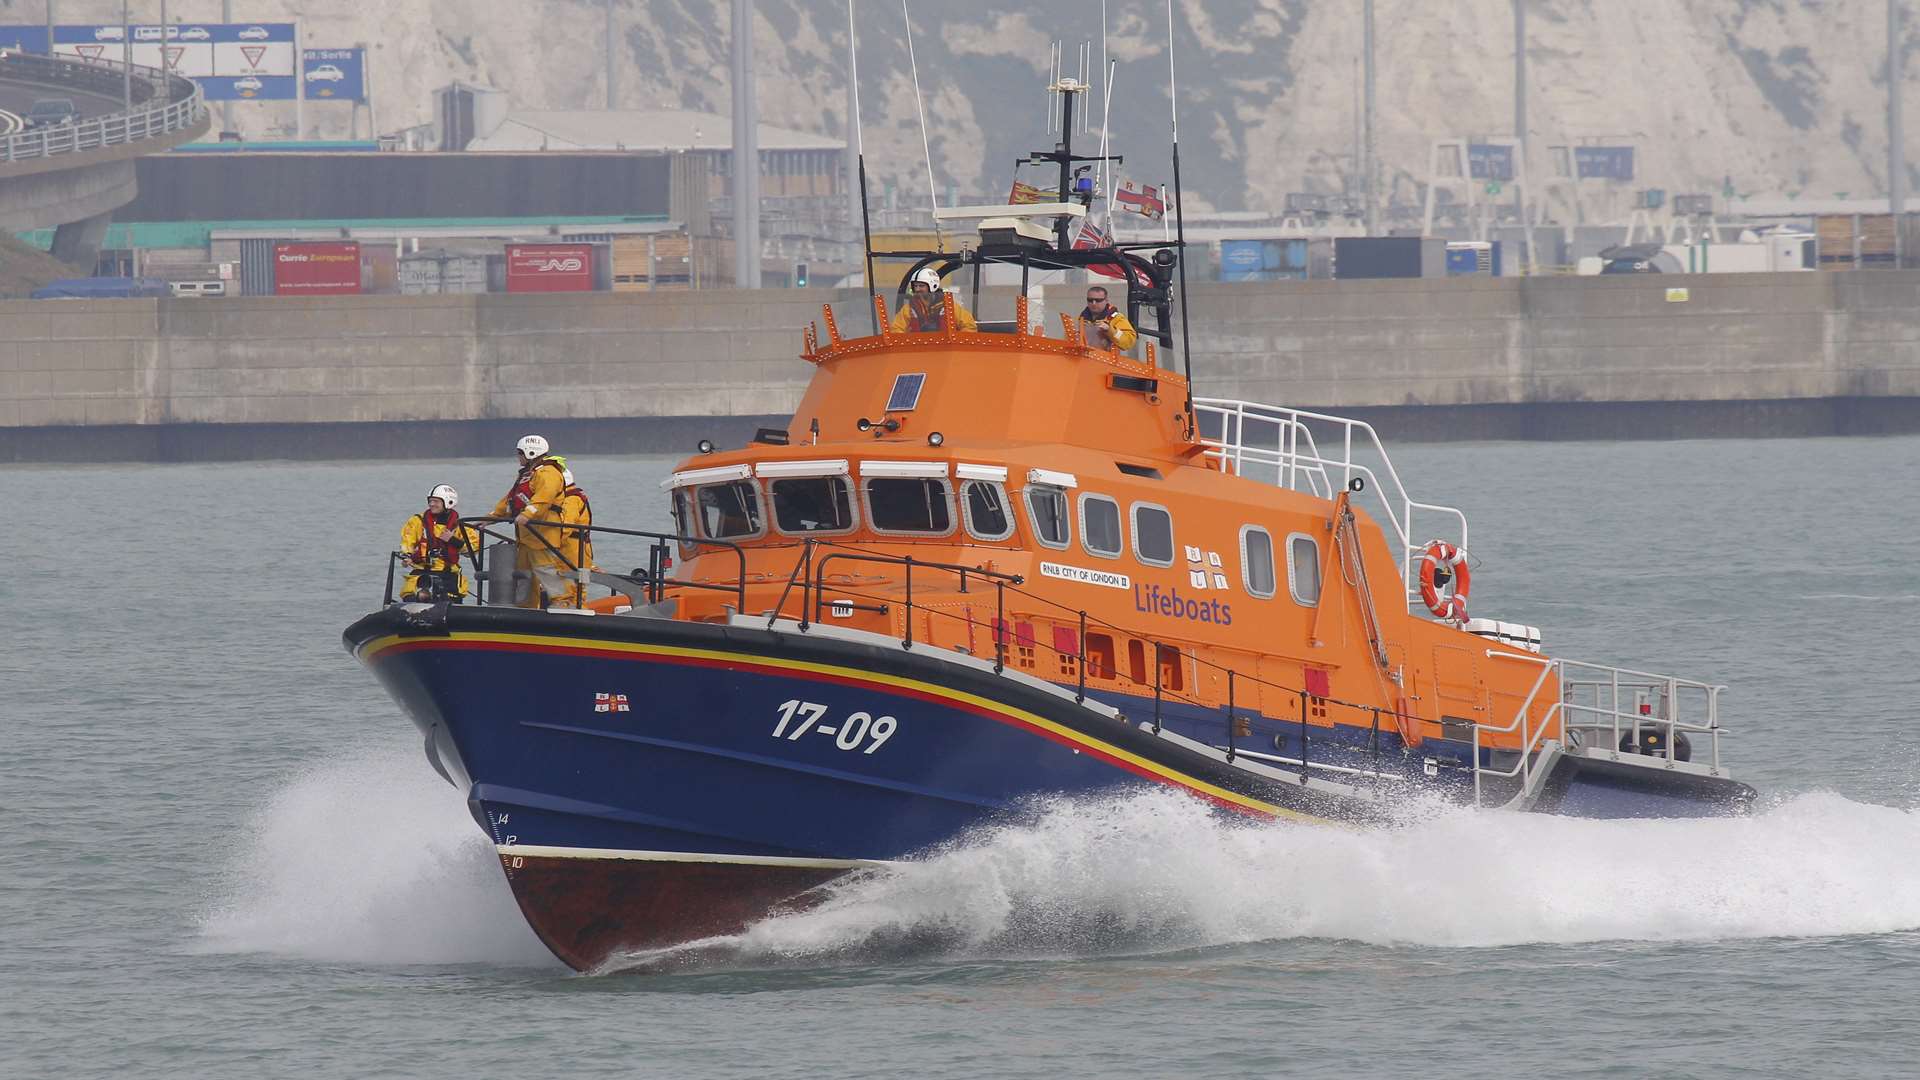 Dover Lifeboat City of London II. KM Media Group library image